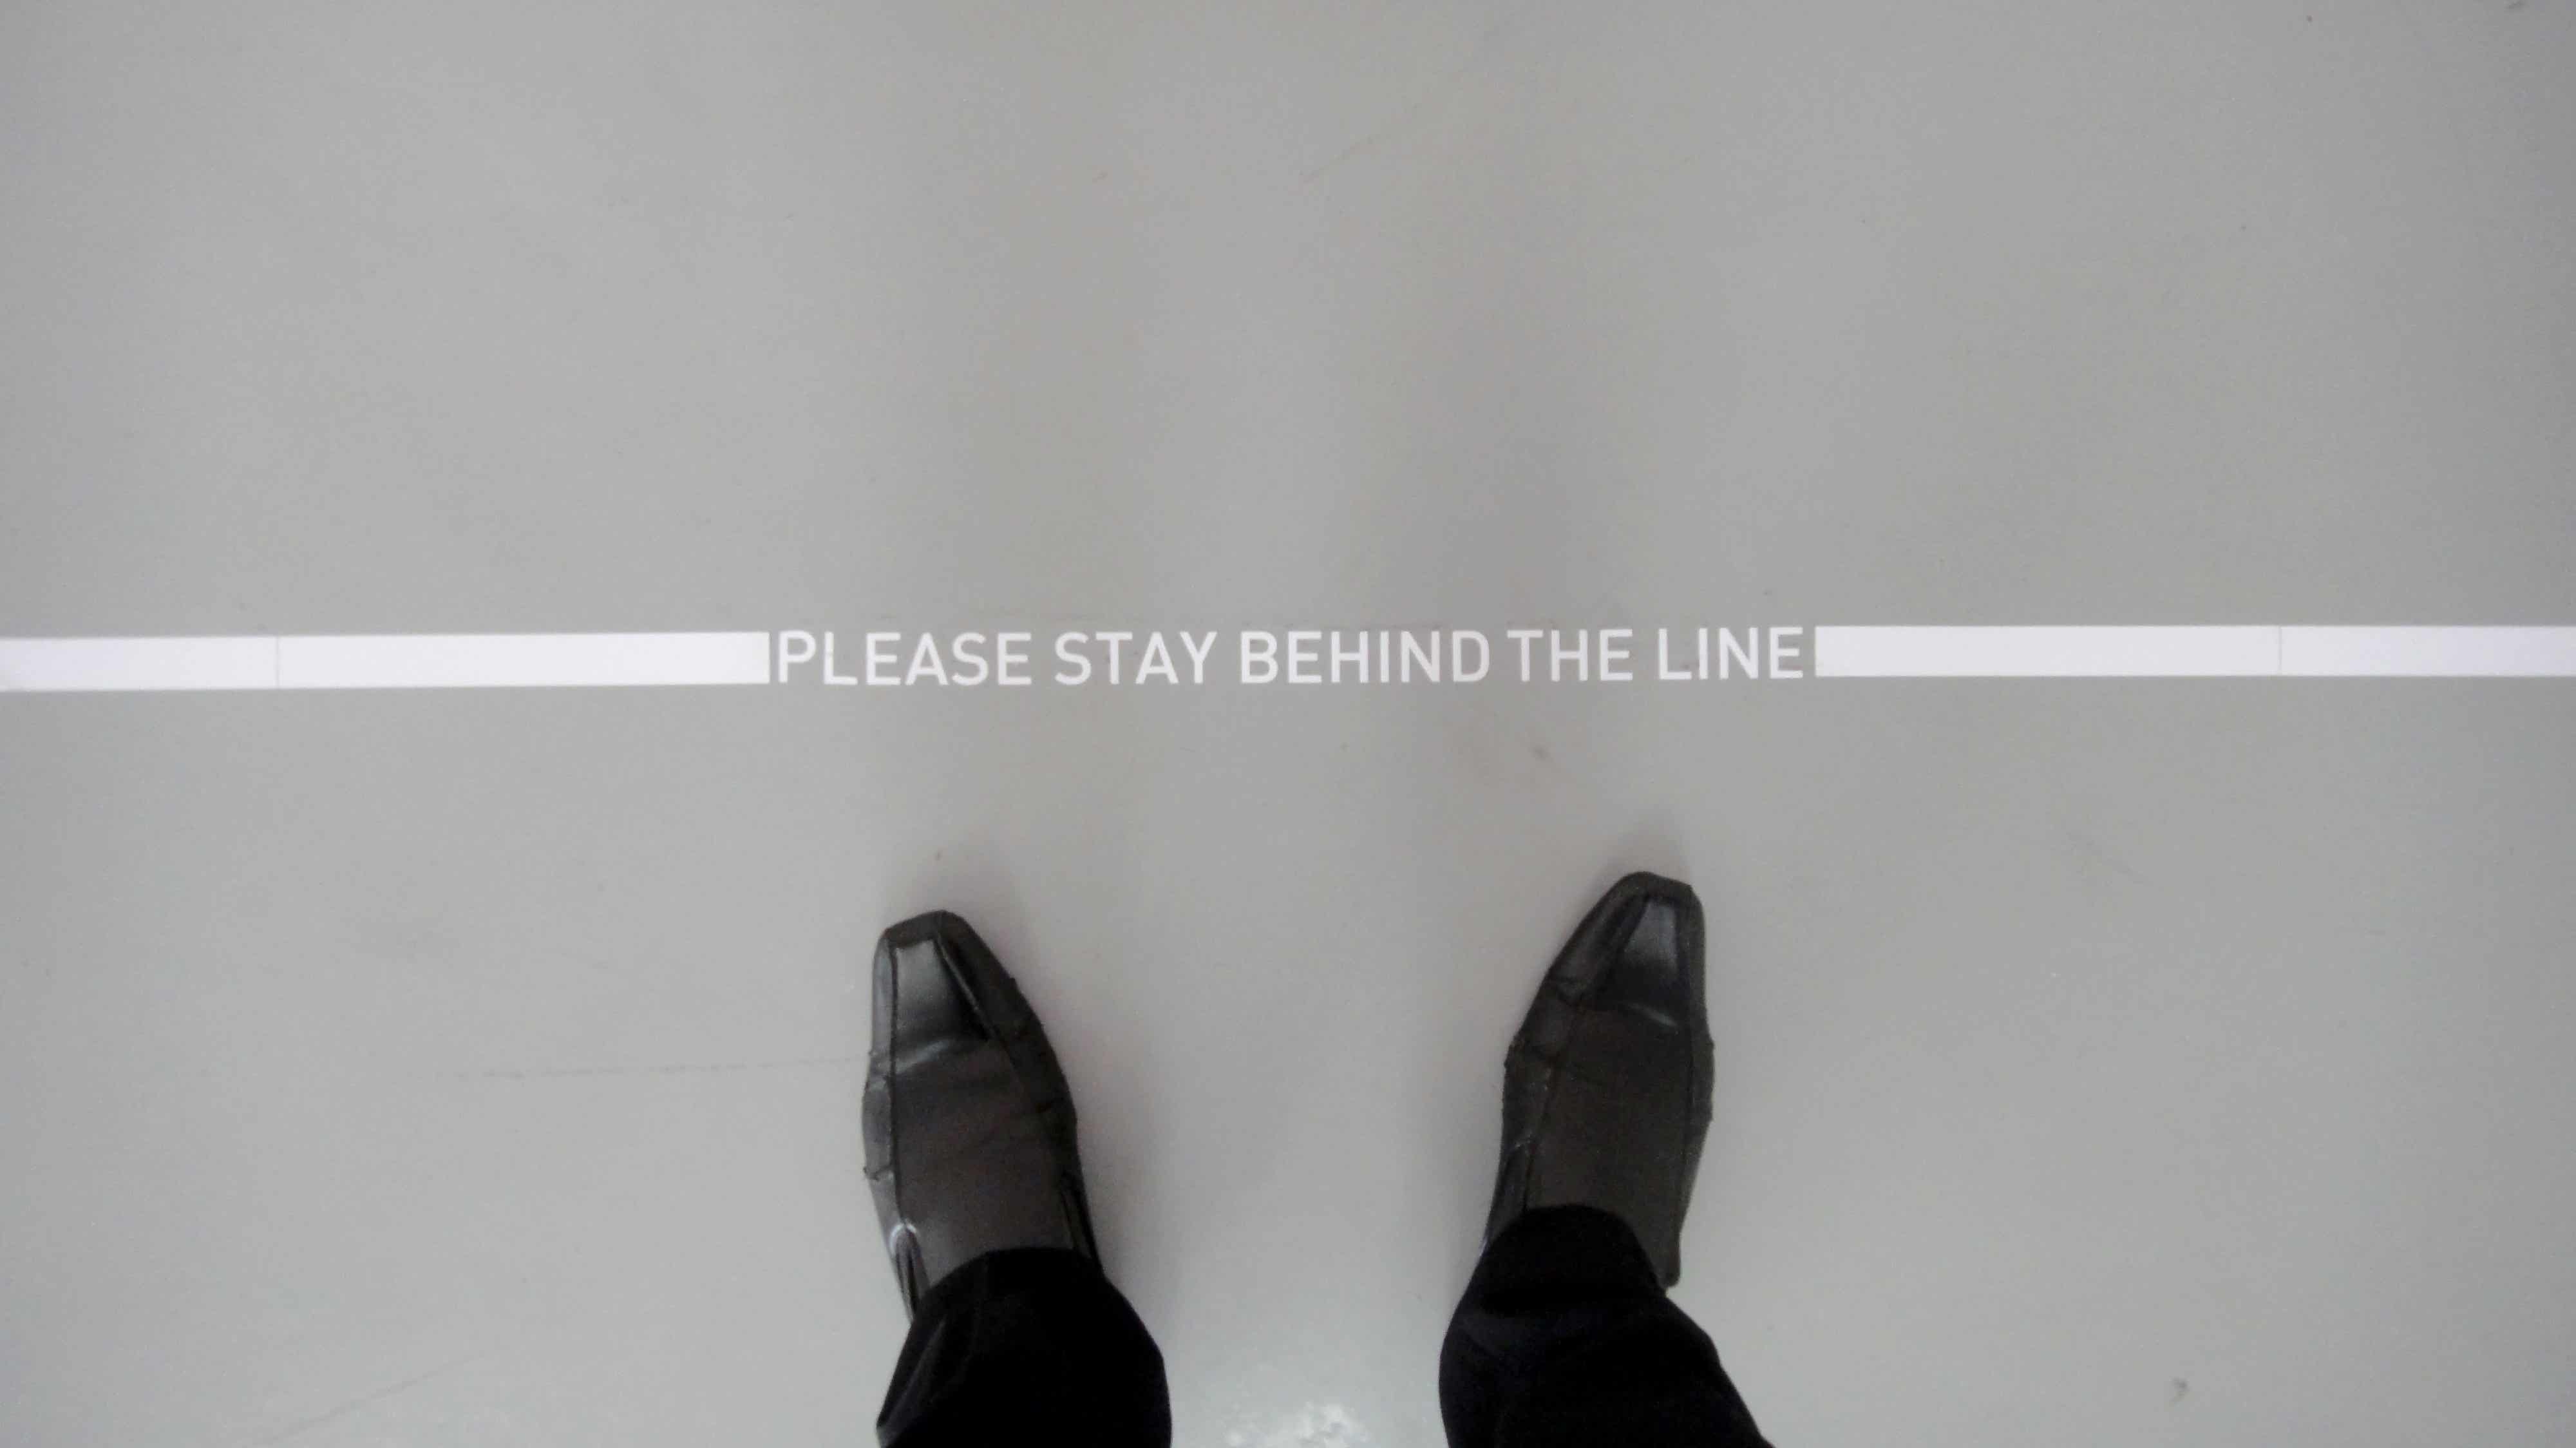 Someone standing behind a line that reads "Please stay behind the line".